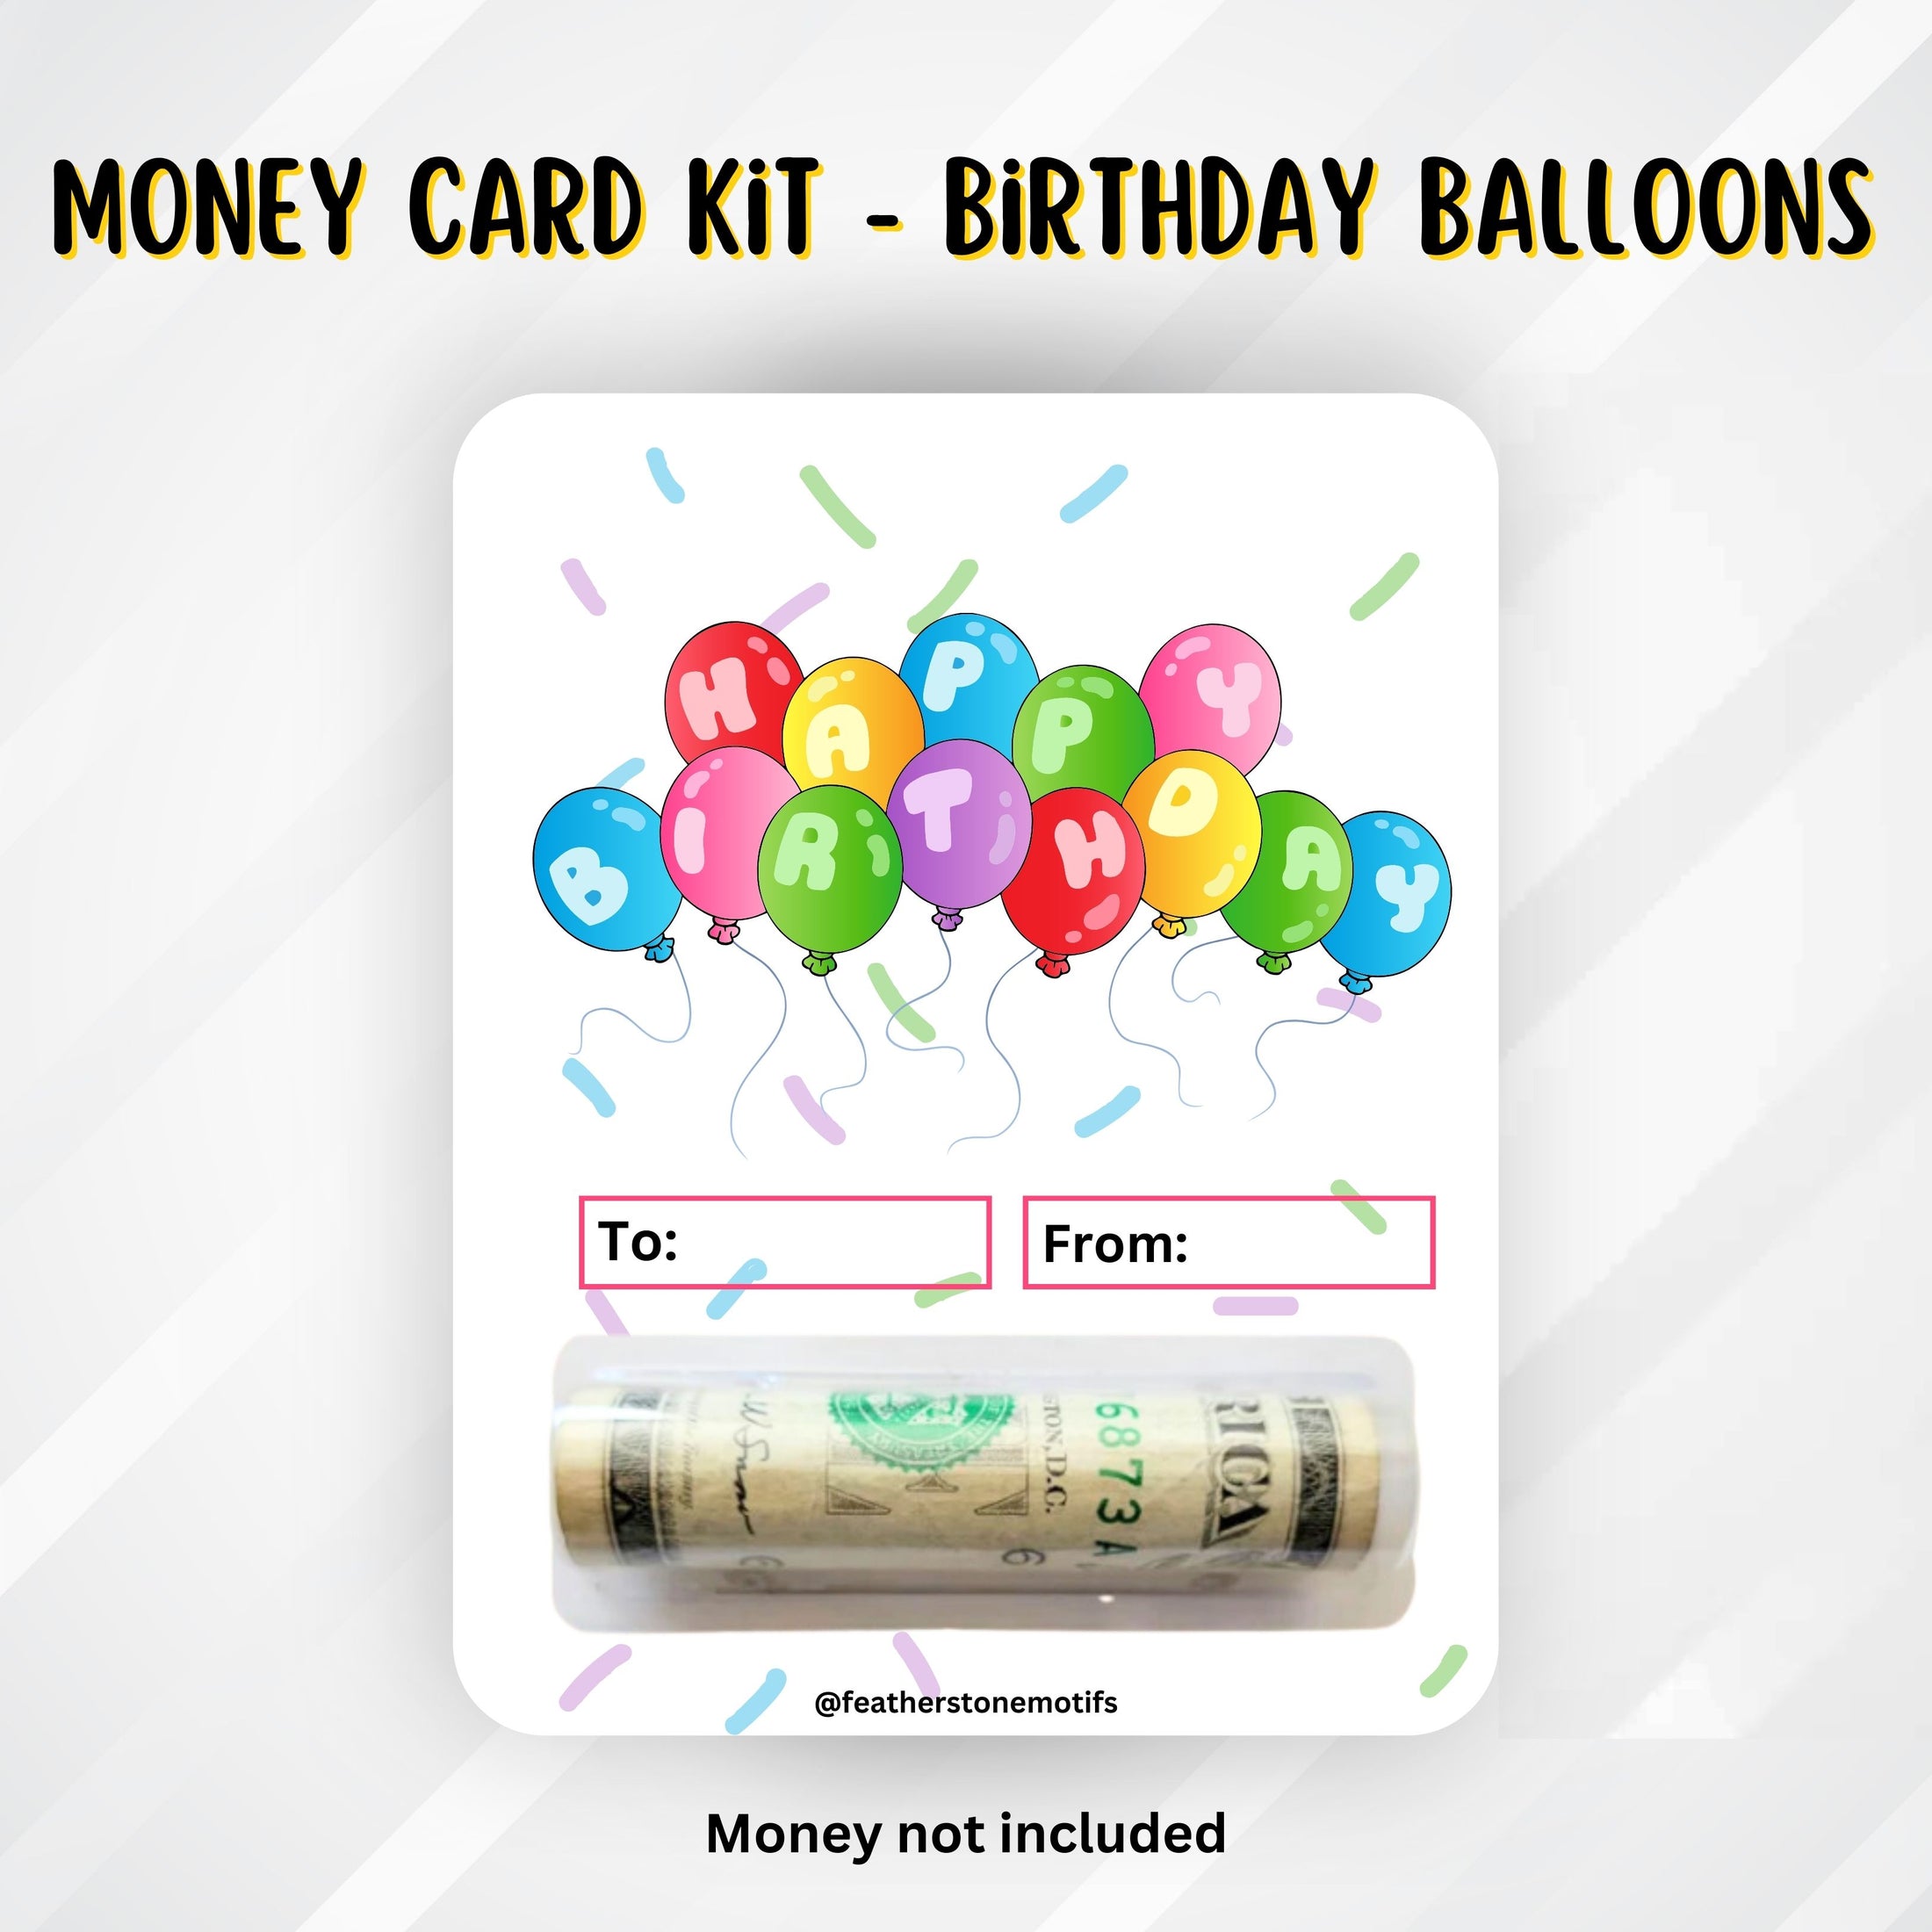 This image shows the money tube attached to the Birthday Balloons money card.